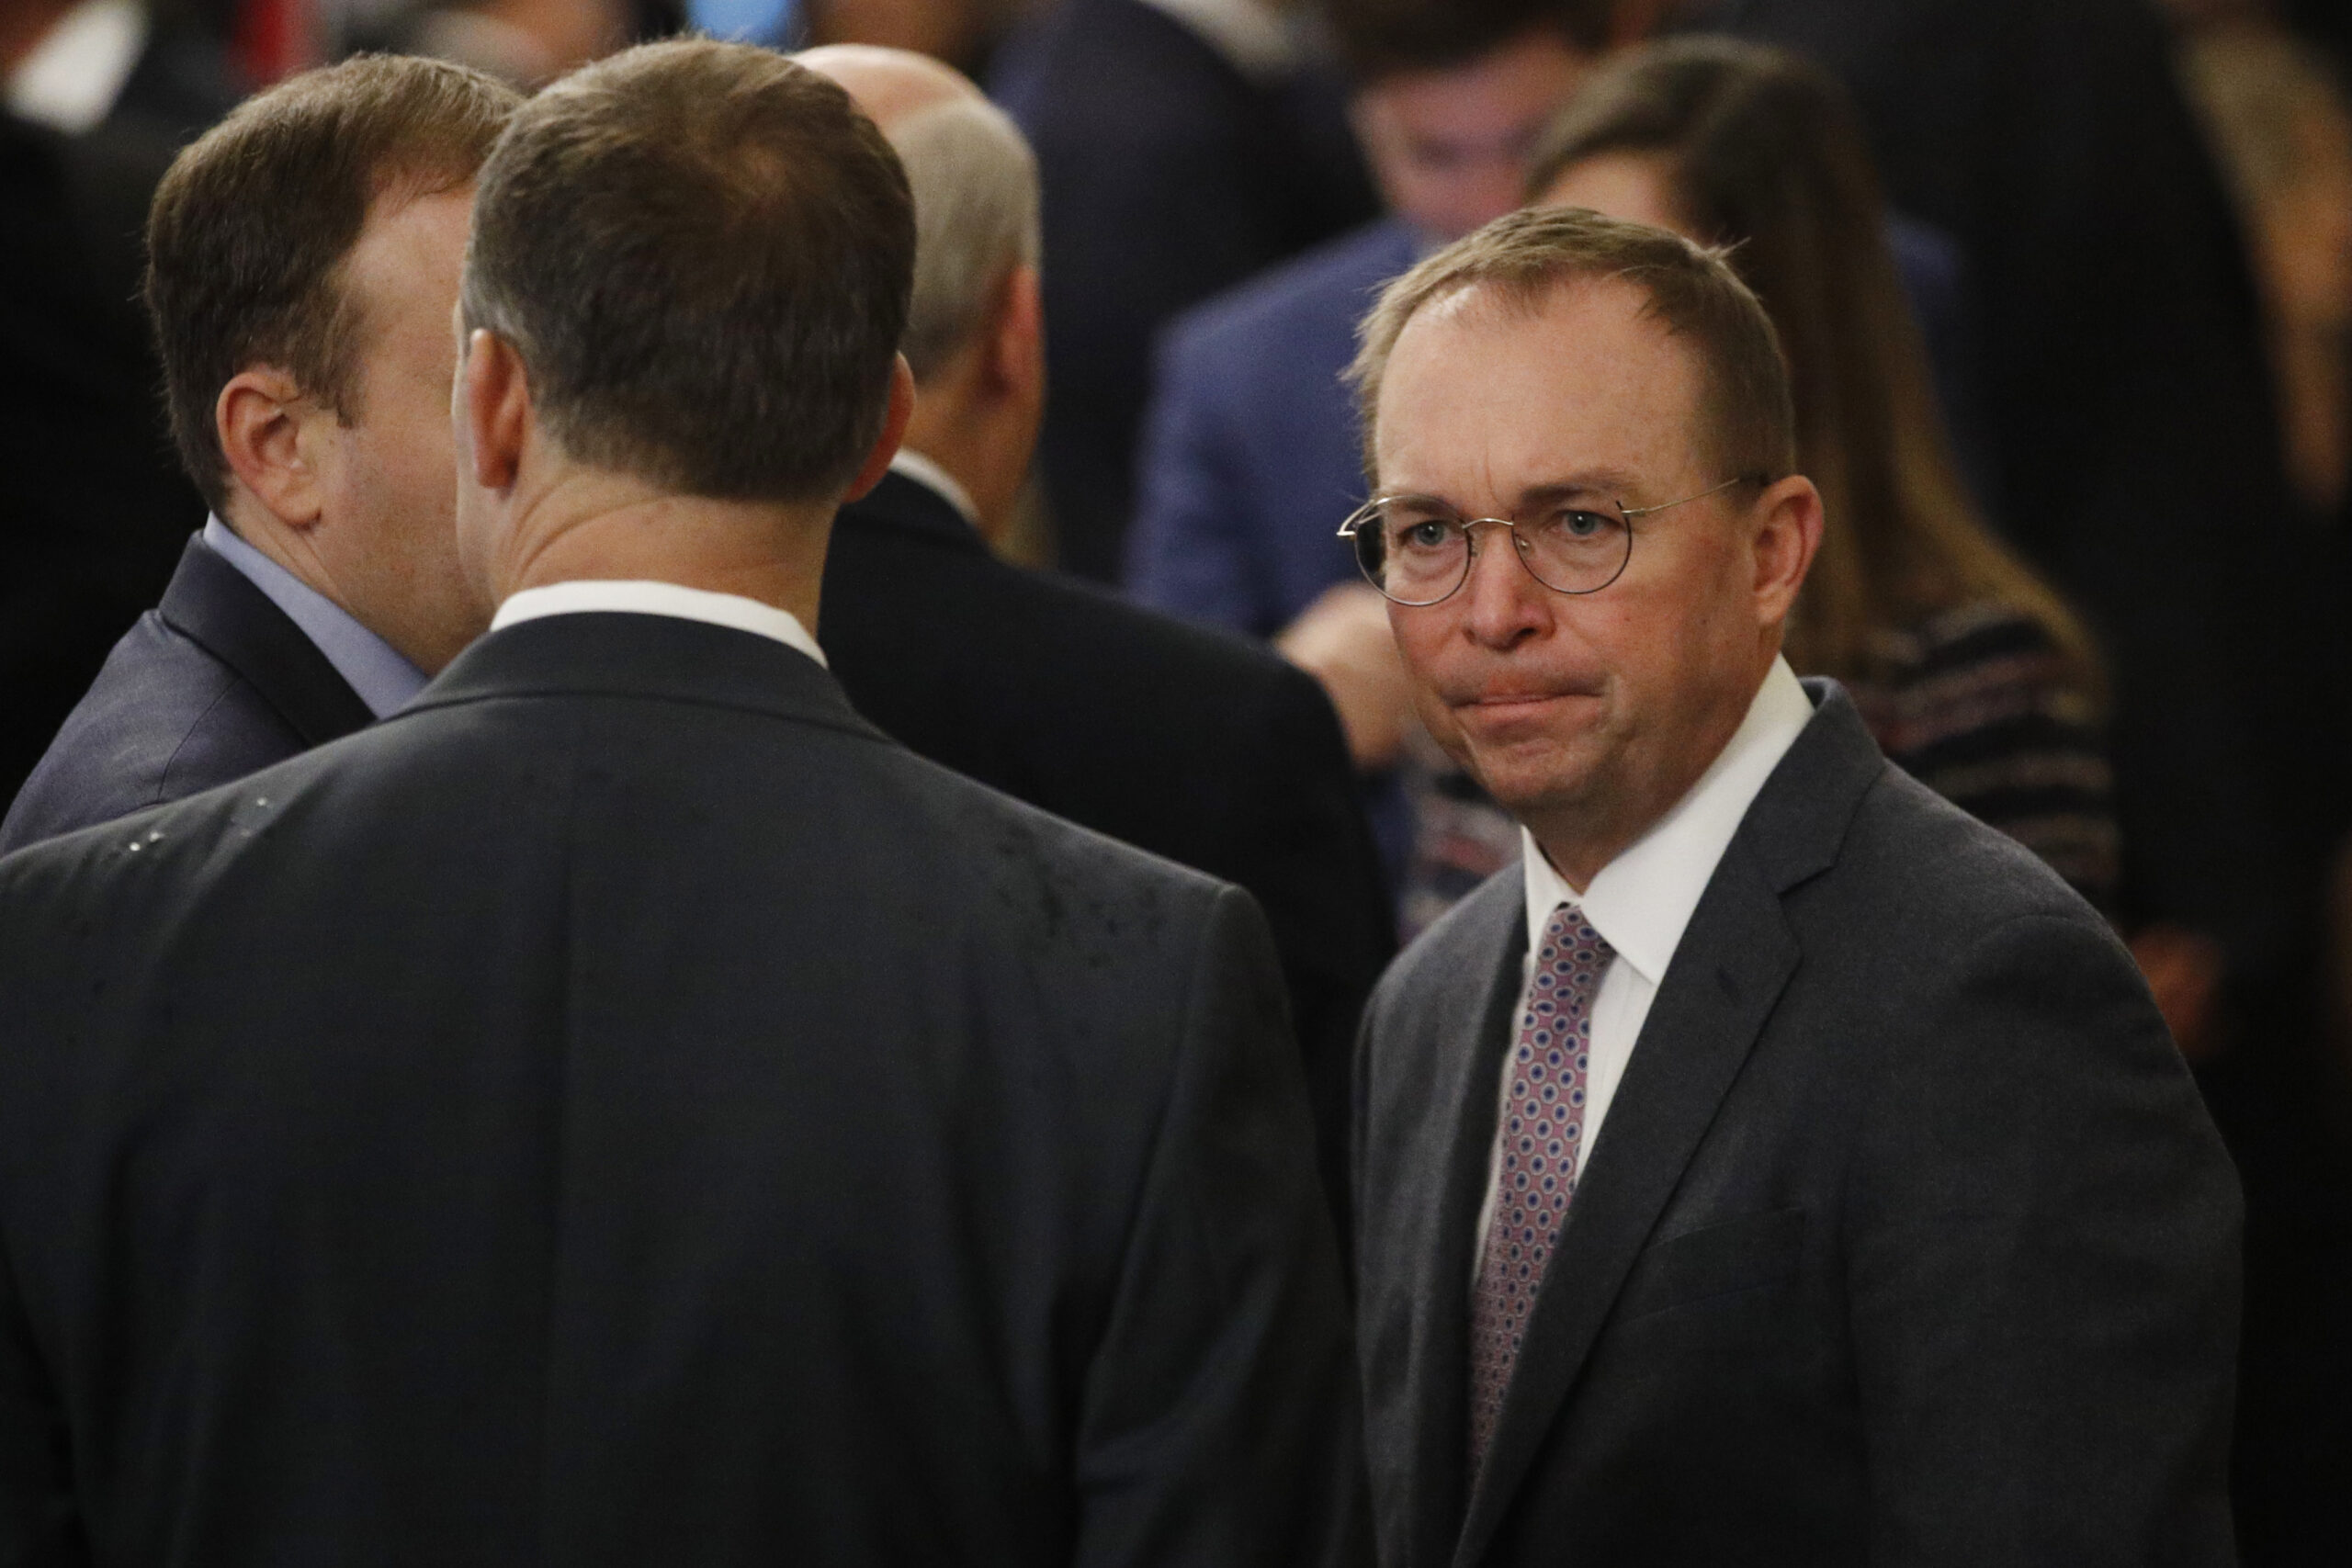 Mulvaney and Heitkamp join K St. heavy hitters at new shop